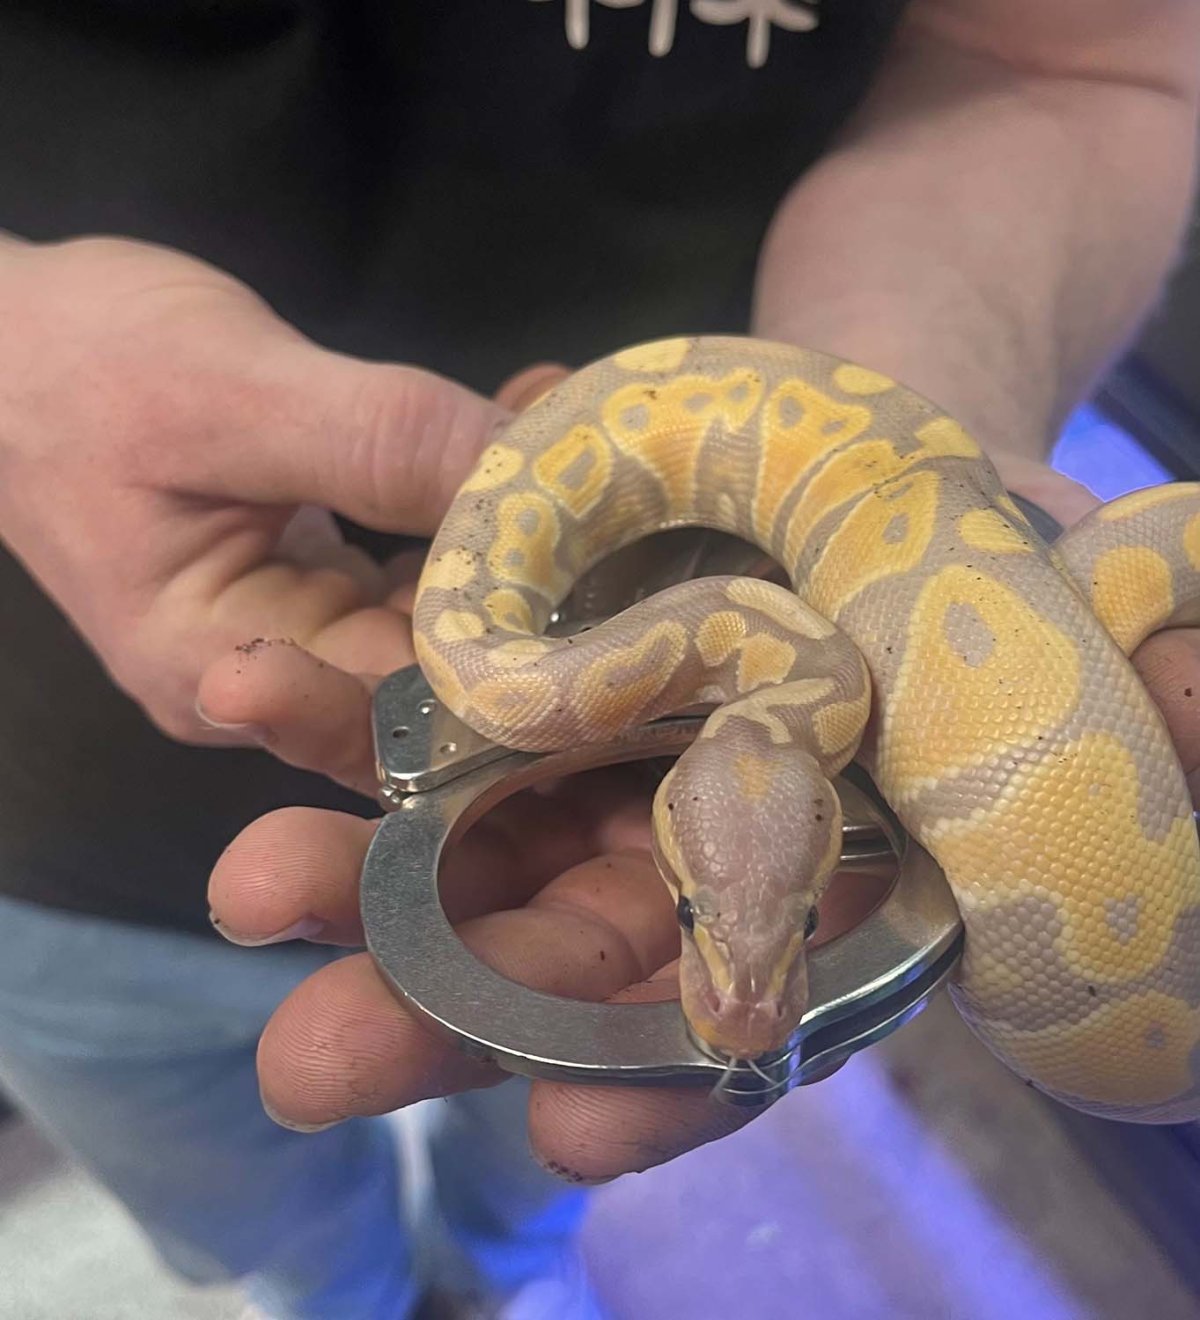 The search for an $800 banana python that was stolen from a business in the 300 block of Highway 33 West started on Monday and came to a positive resolution two days later.